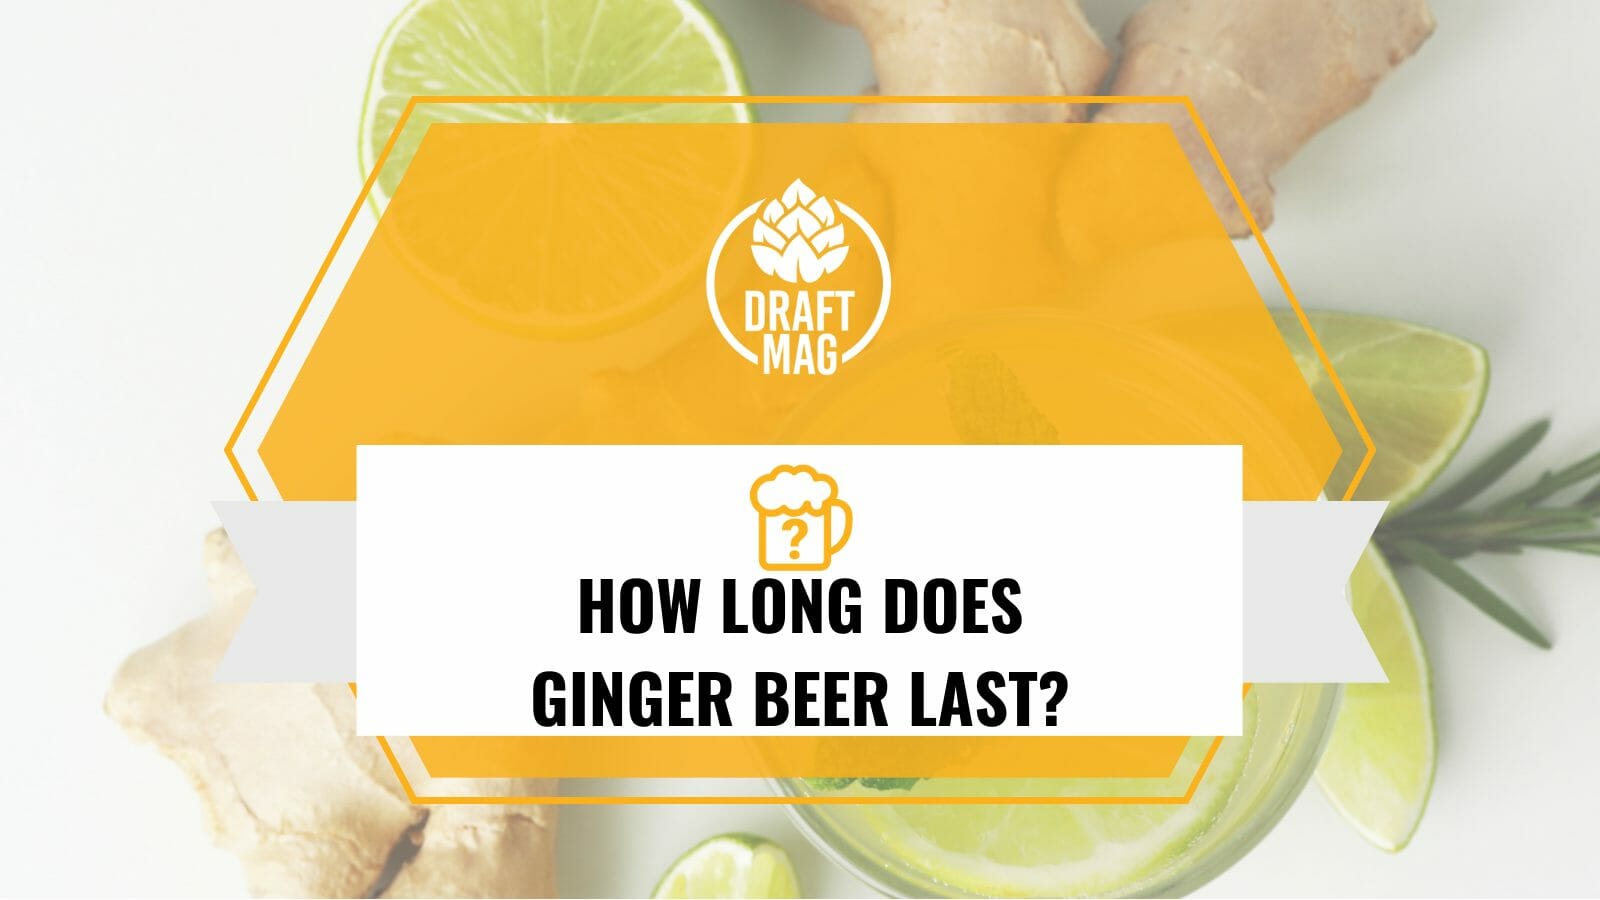 How long does ginger beer last